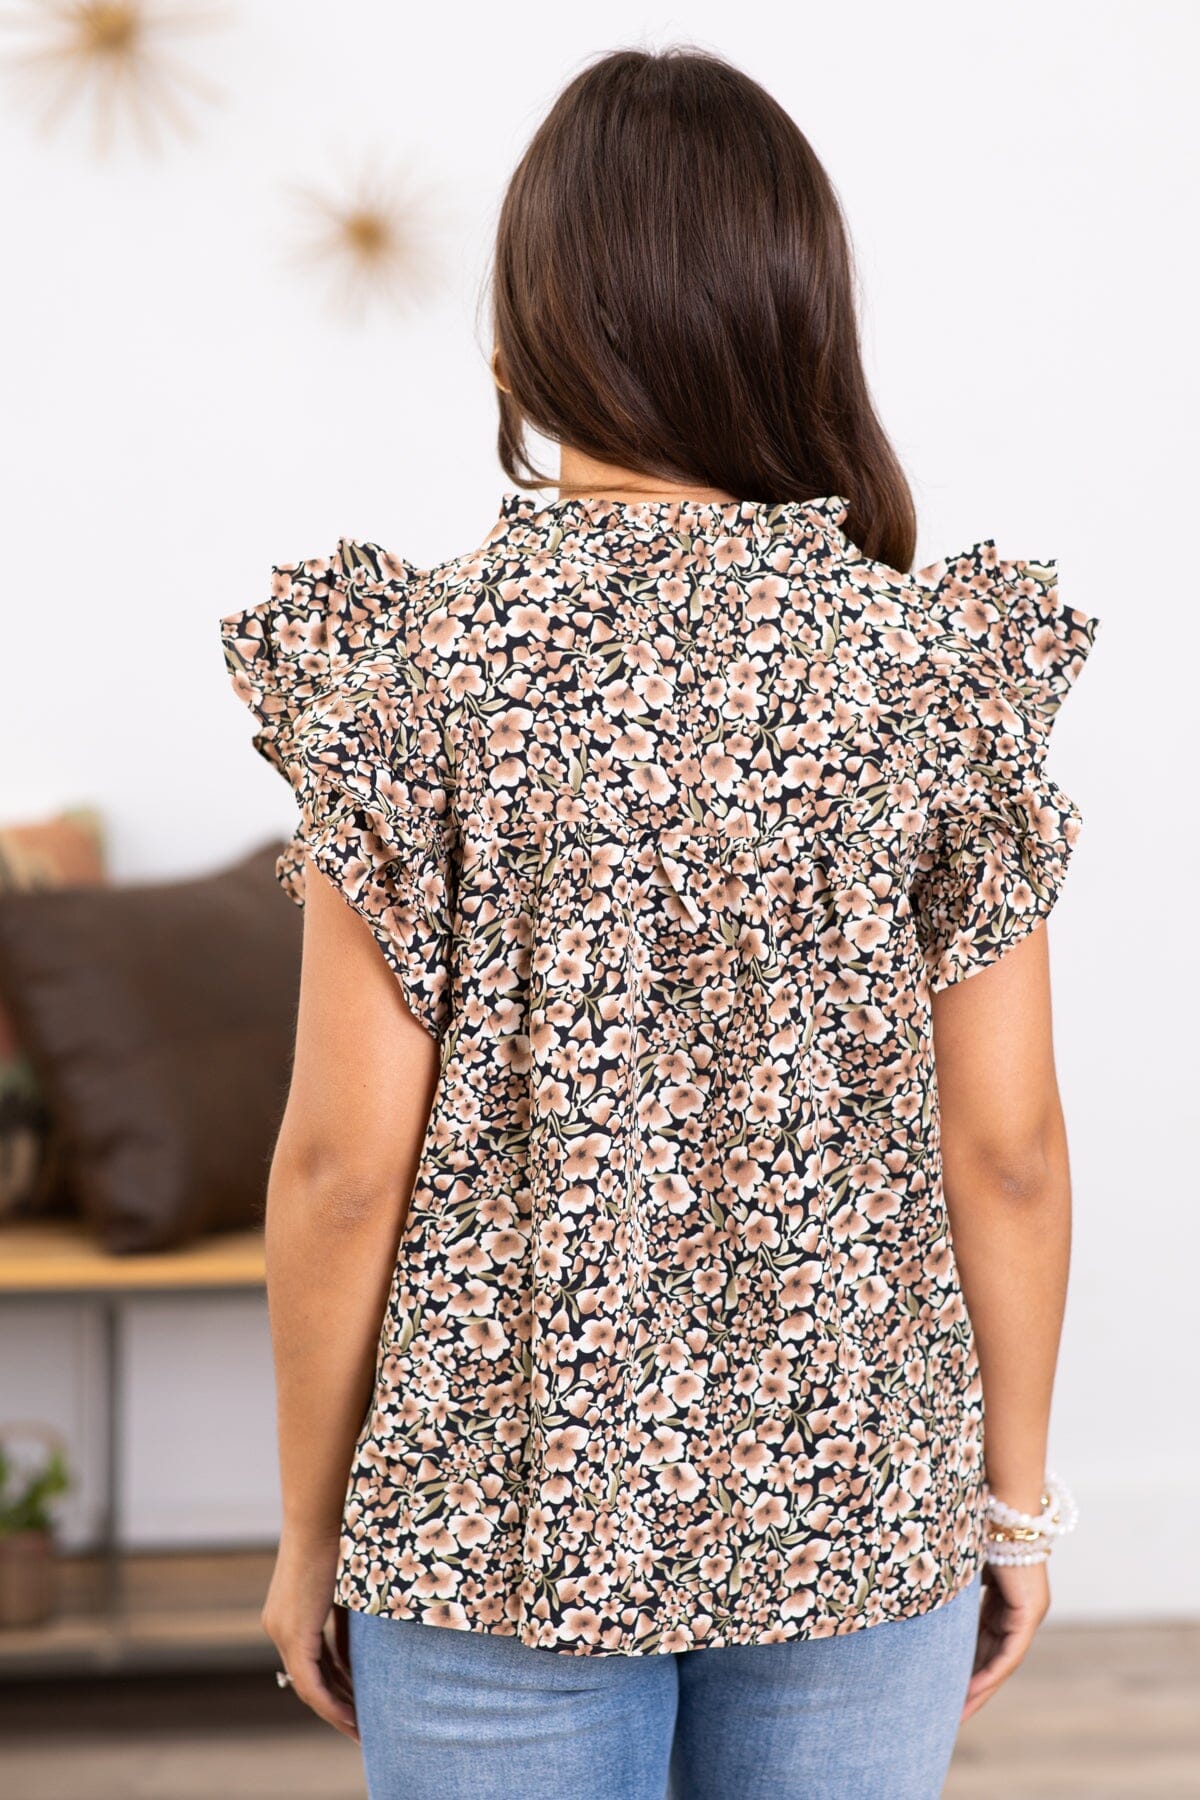 Black and Tan Floral Print Notch Neck Top - Filly Flair